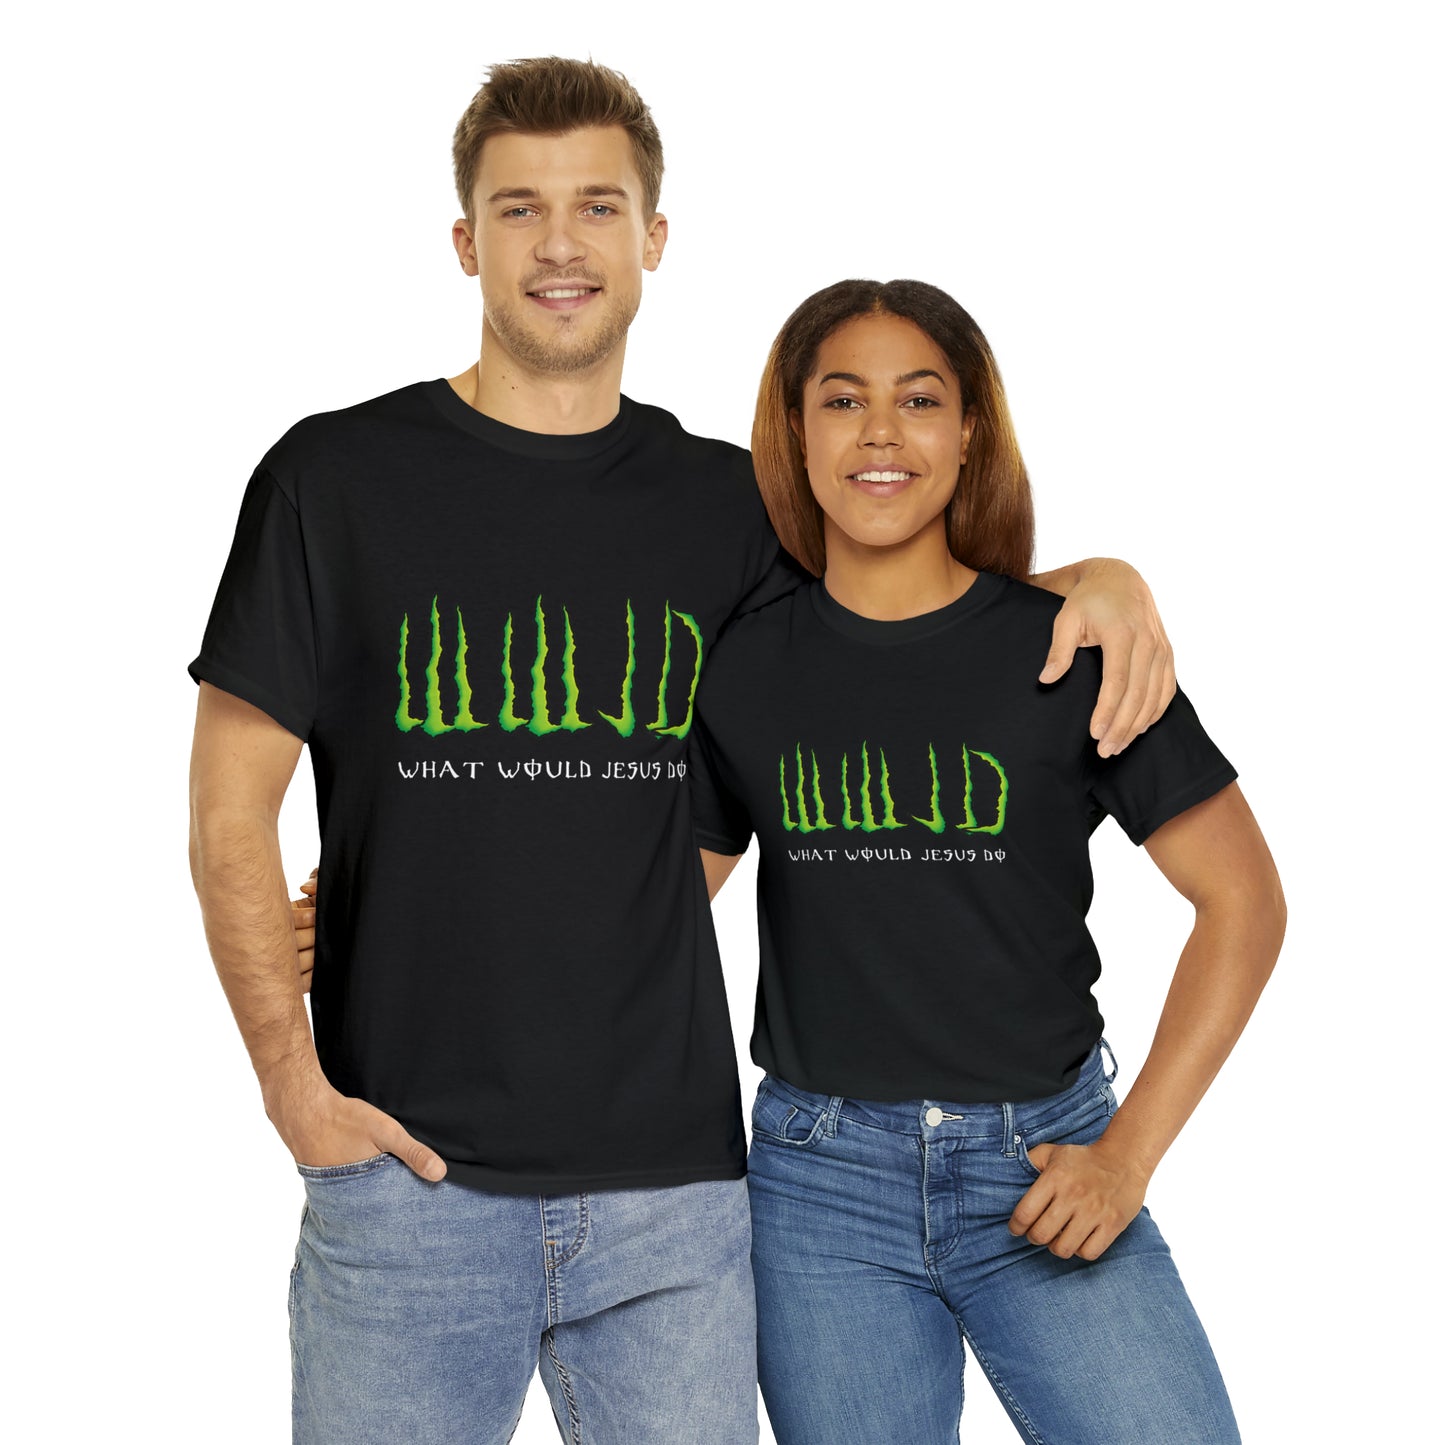 WWJD (What Would Jesus Do) Monster Energy Shirt